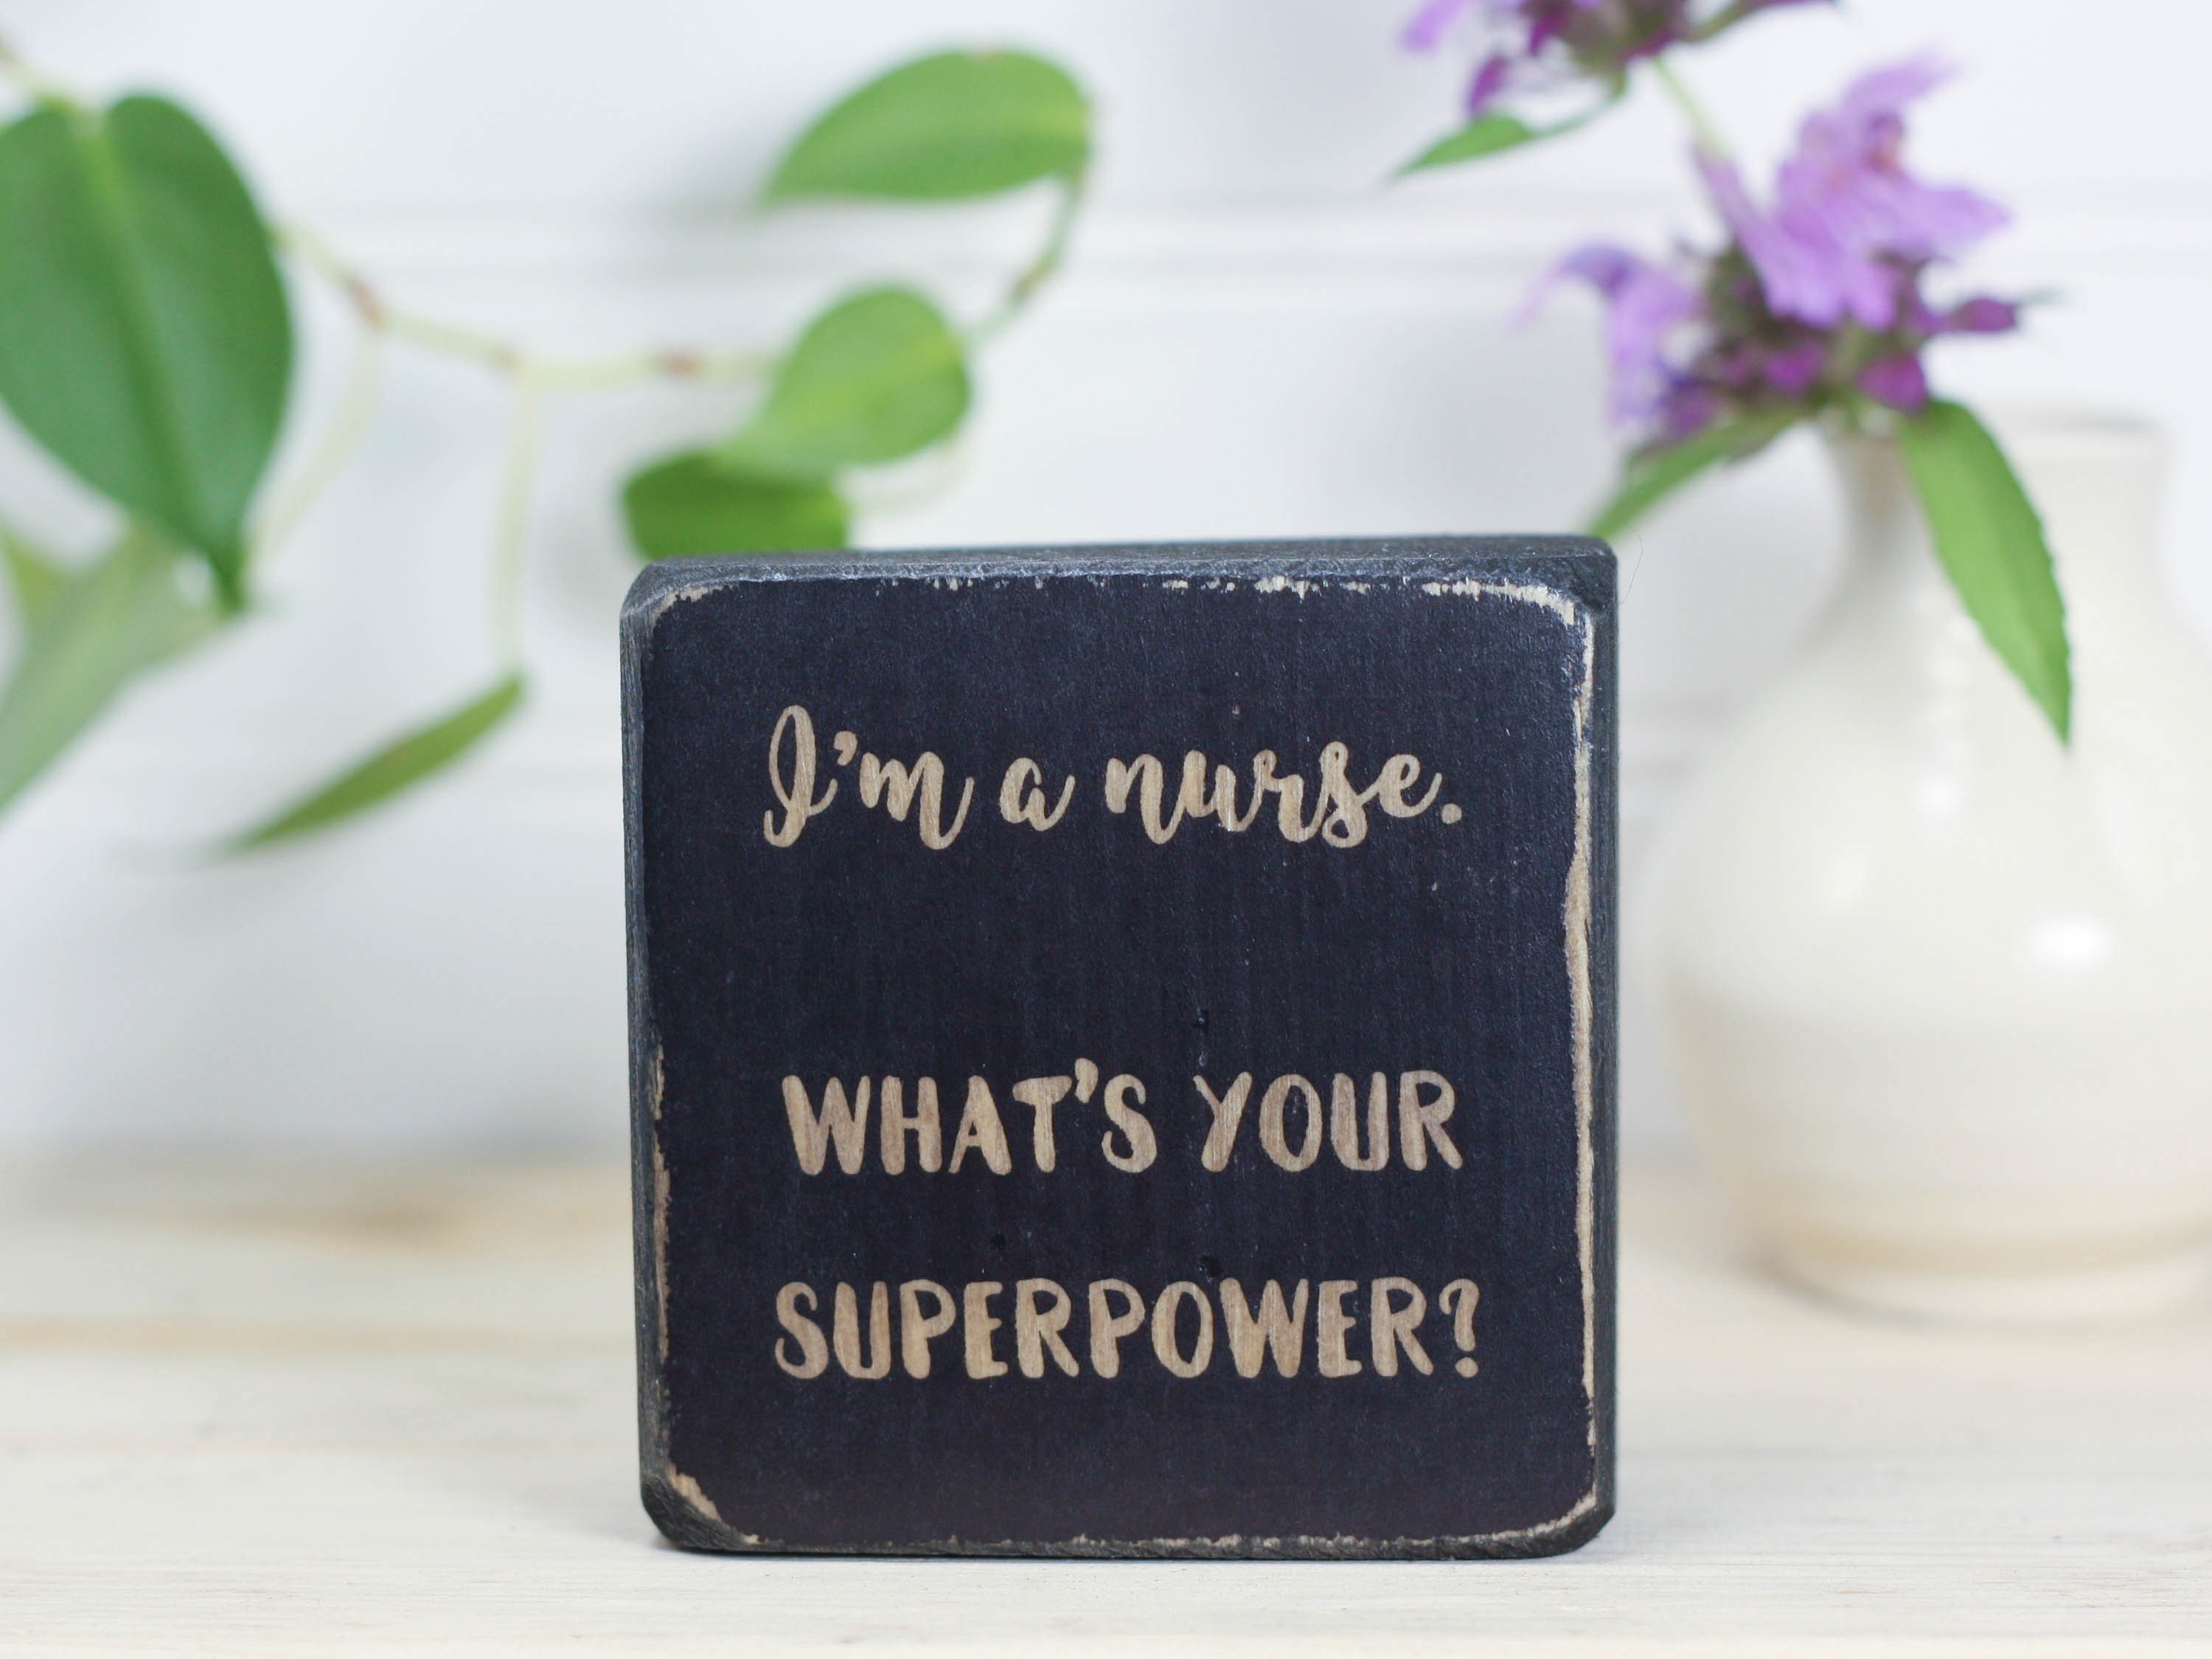 Mini wood sign in distressed black with the saying "I'm a nurse. What's your superpower?"